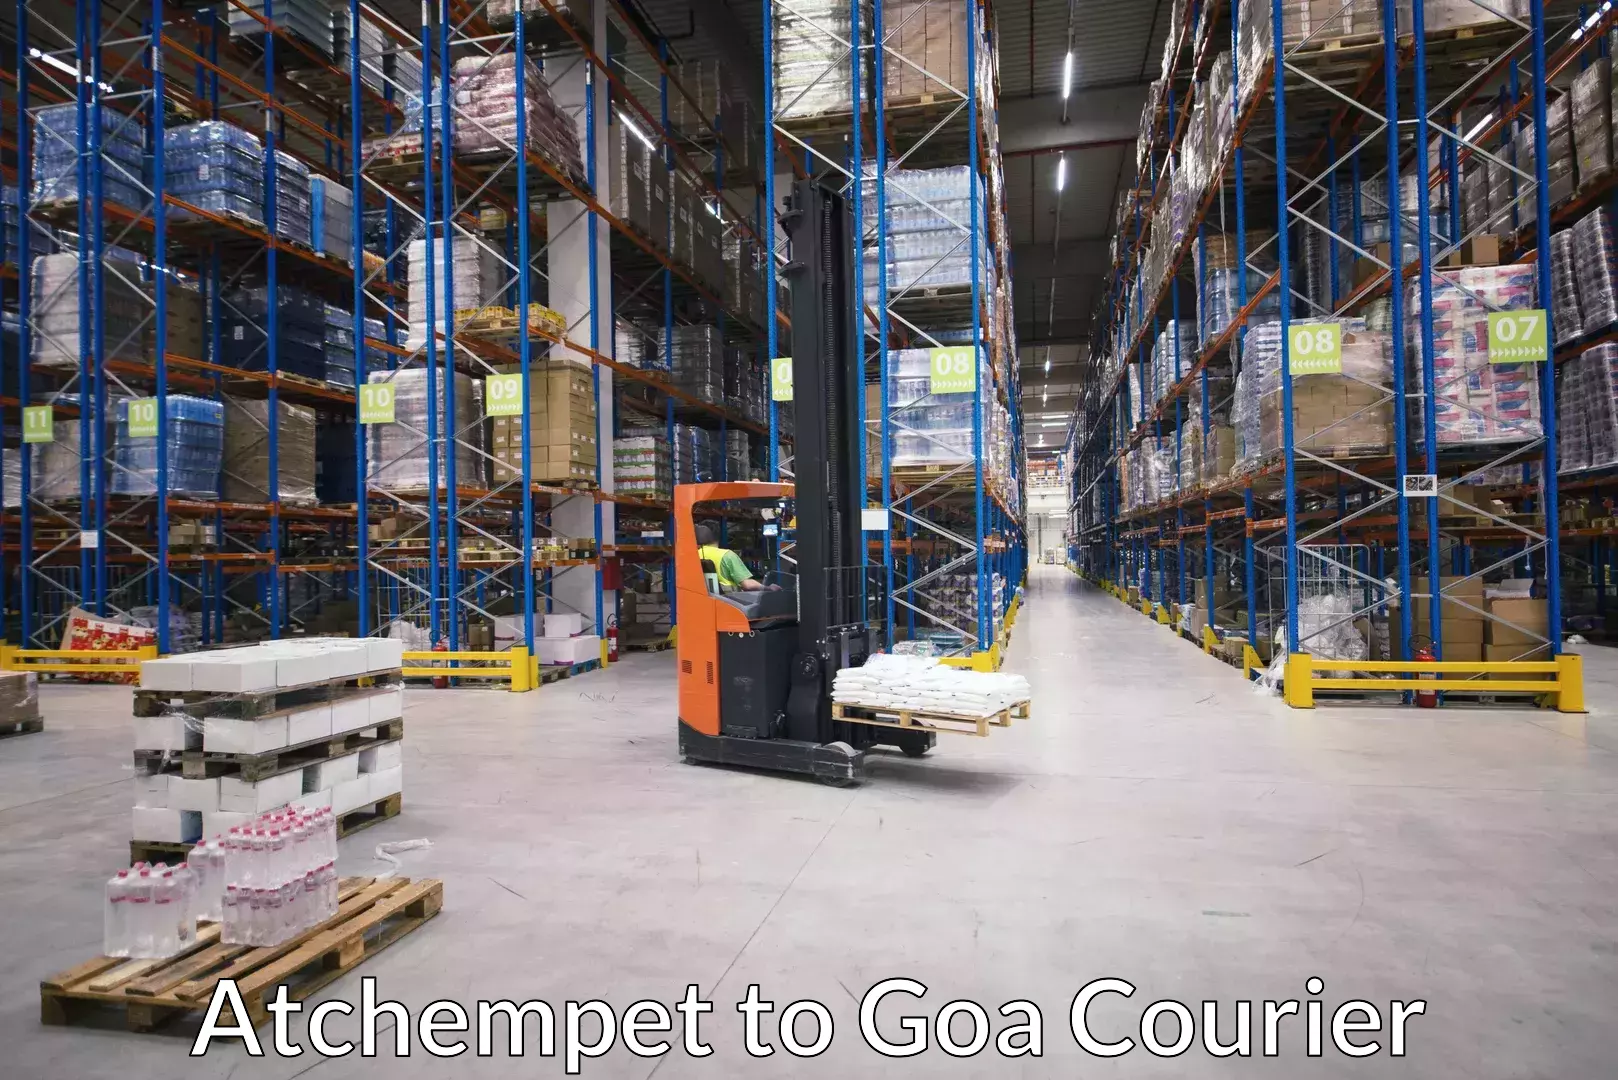 Furniture moving experts Atchempet to Goa